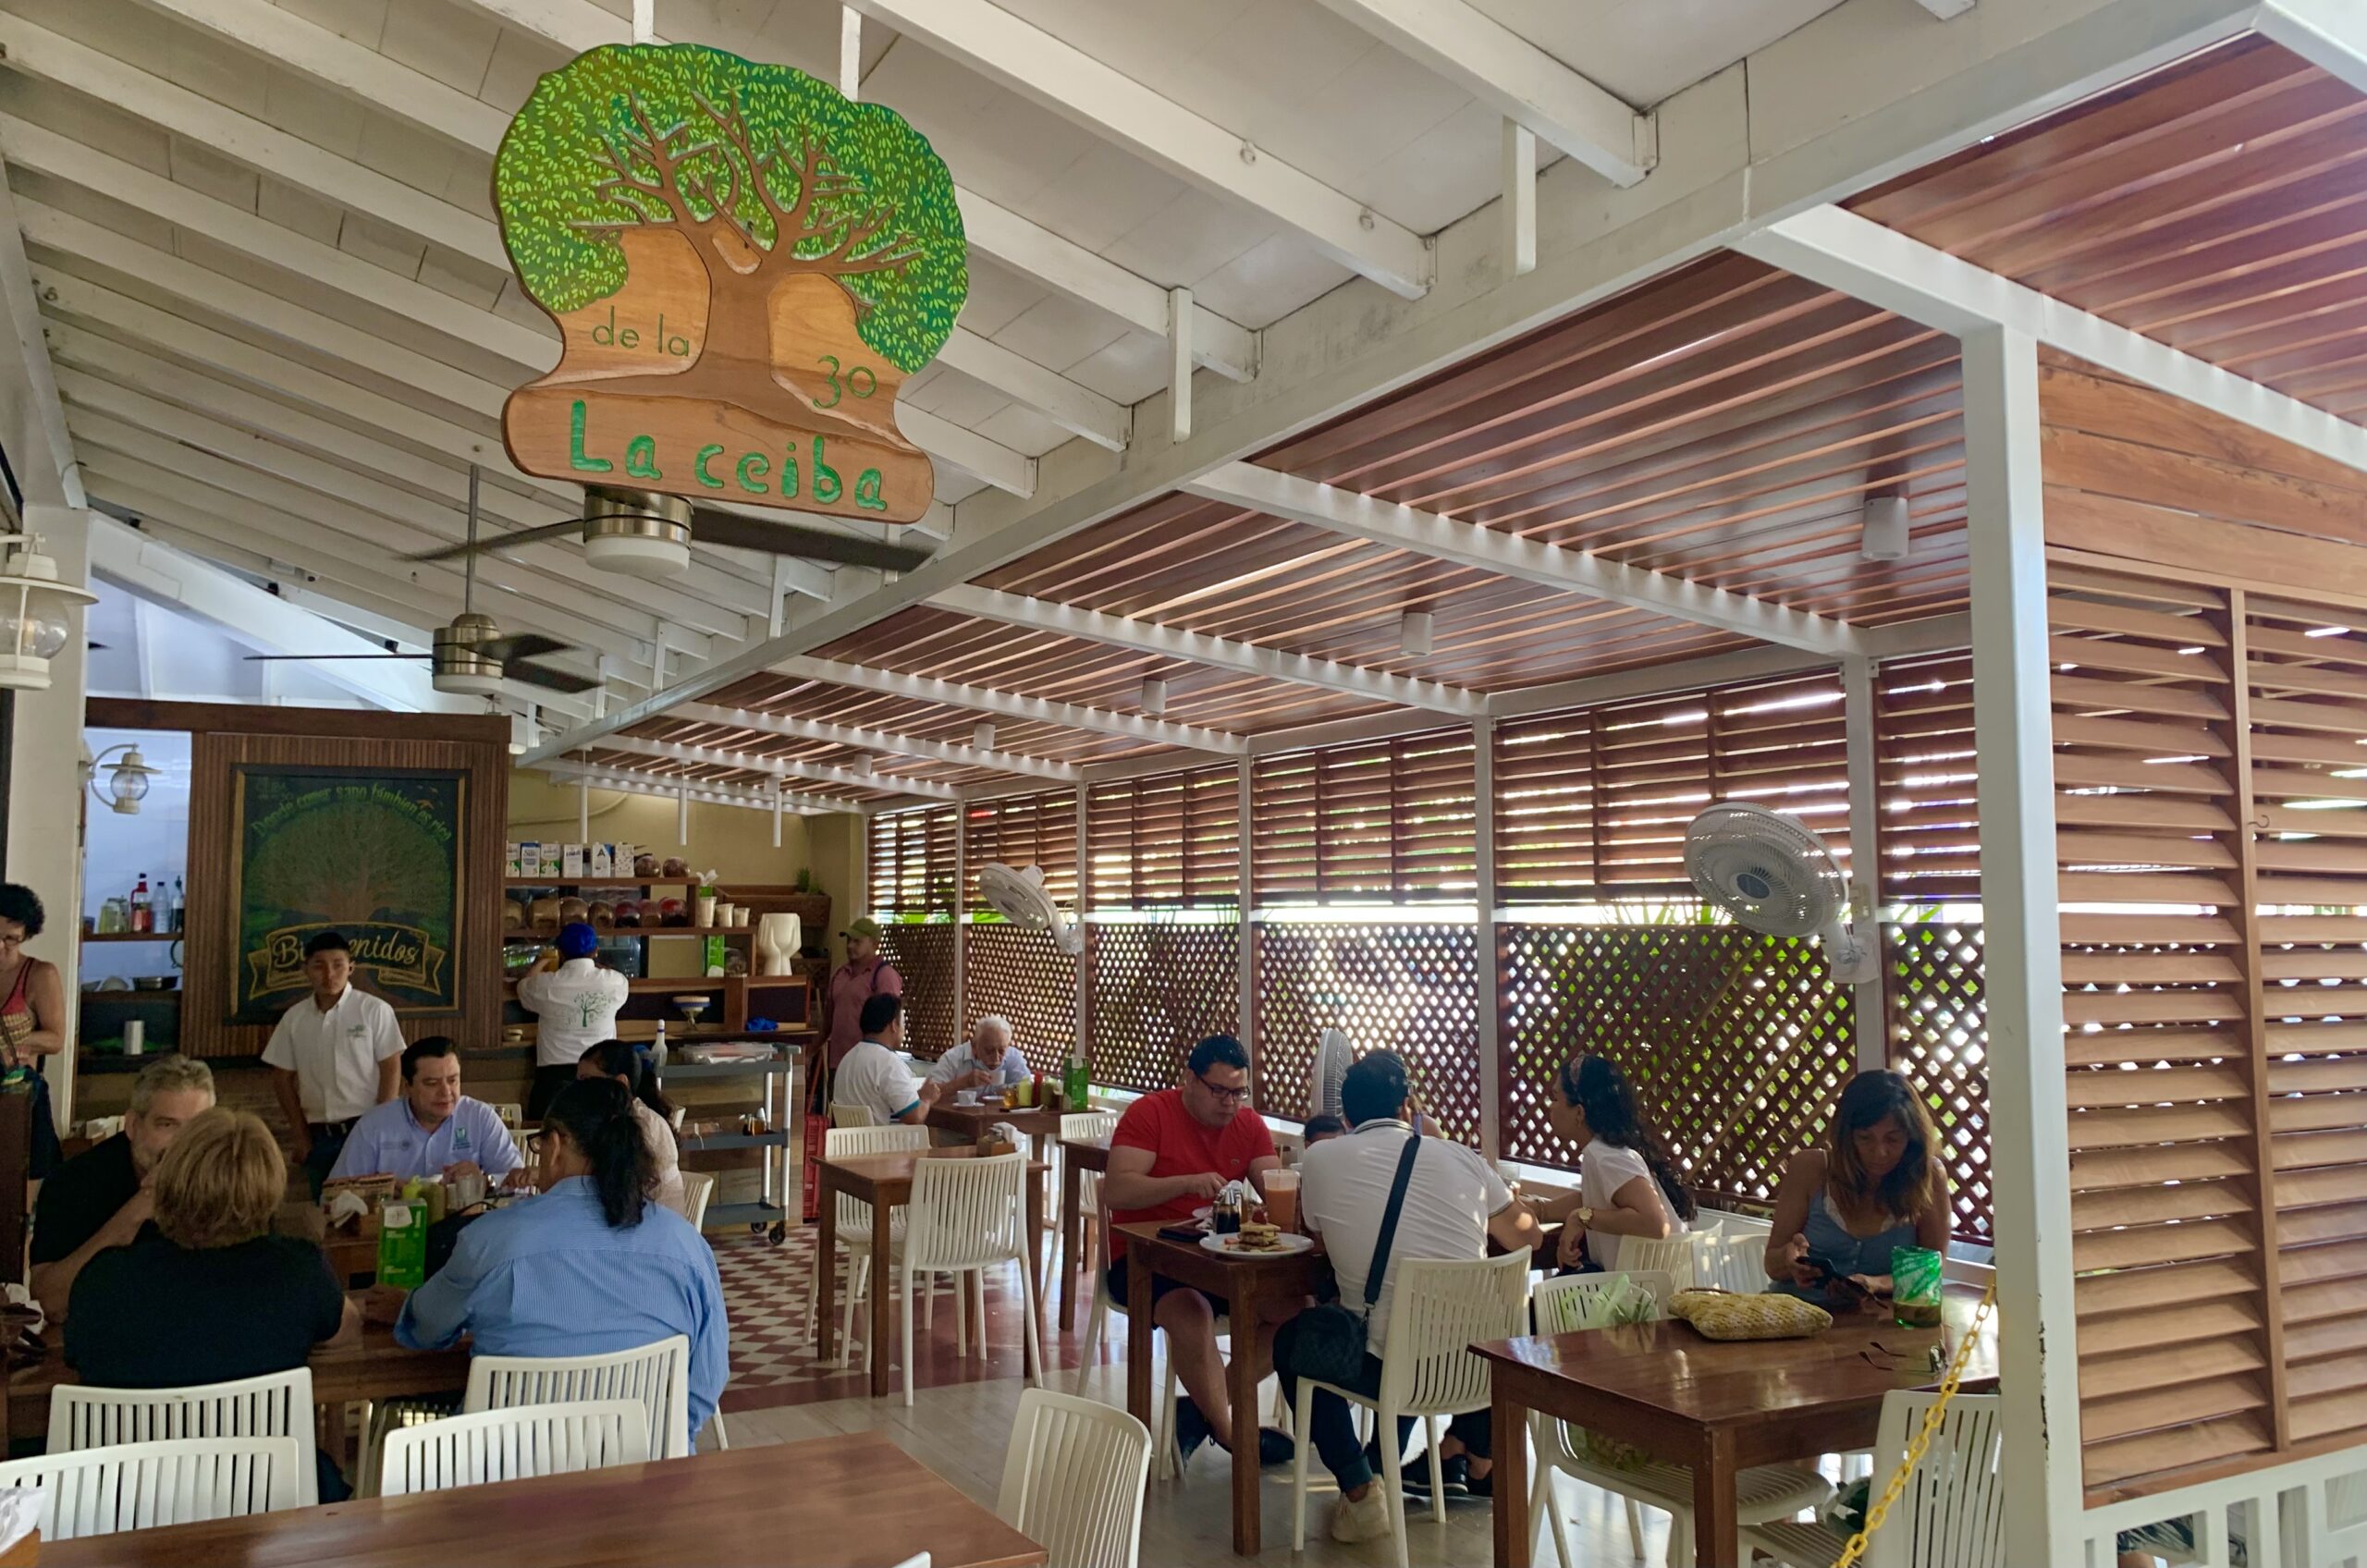 What is it like to eat at DAC Market's La Ceiba Restaurant?